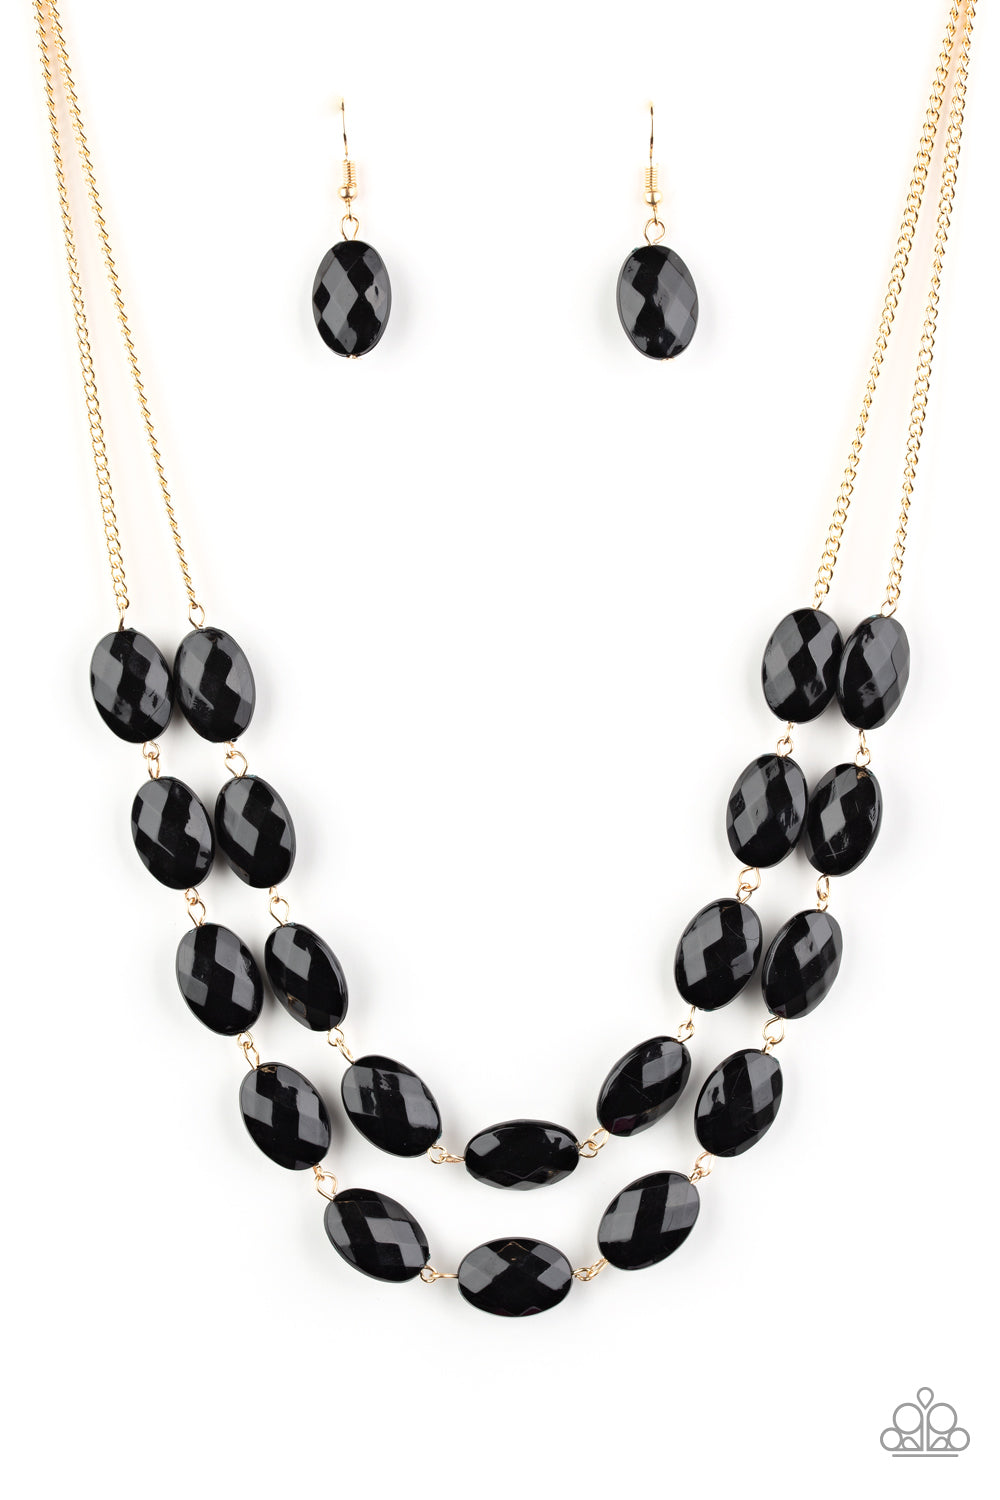 Paparazzi Necklace black beads dangling on a double gold sleek chain. 